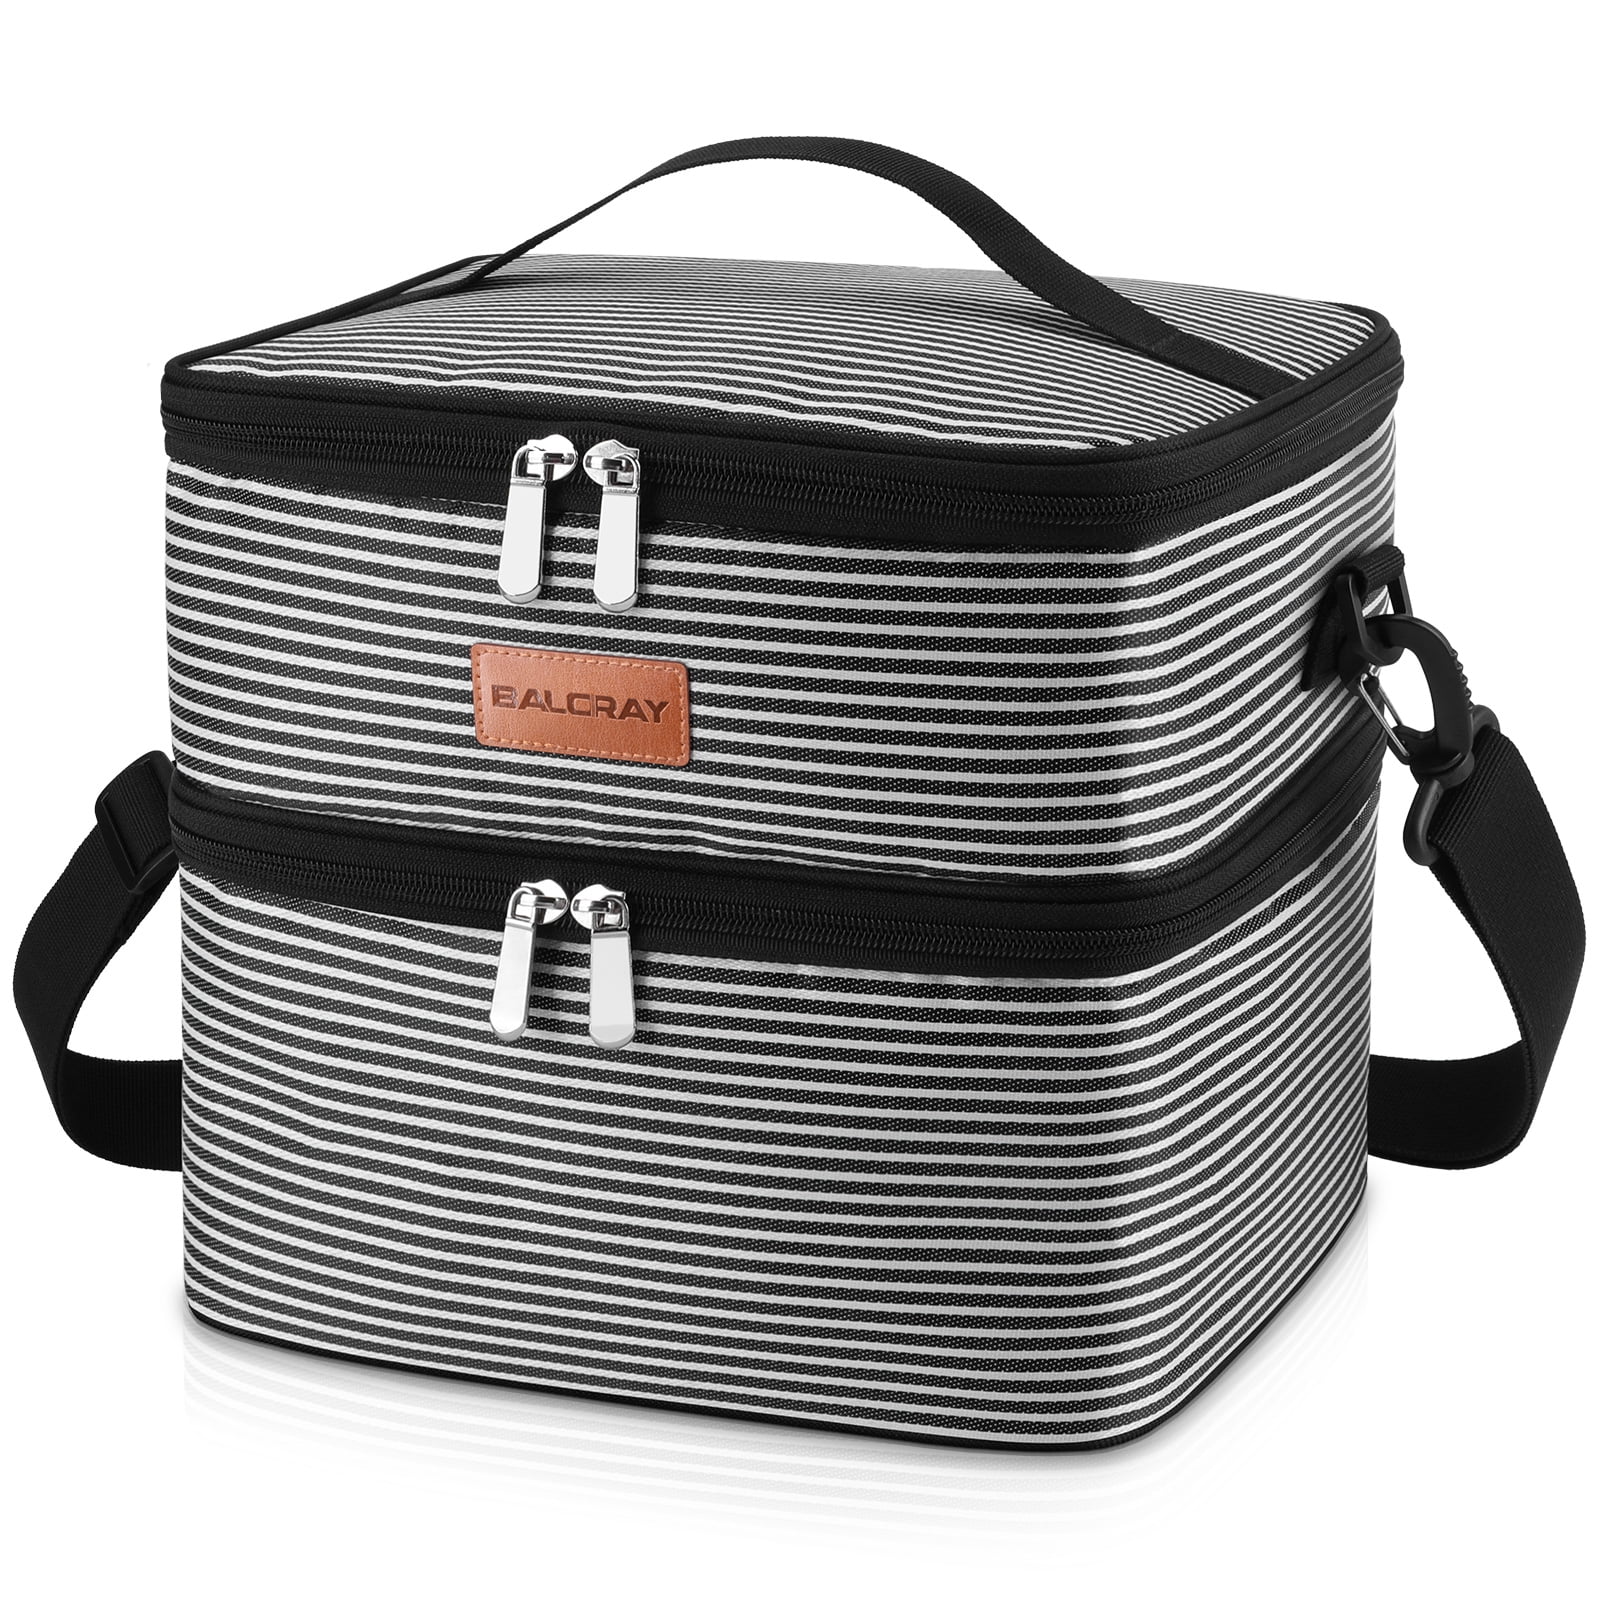 Adult Insulated Lunch Box Reusable Lunch Bag Cooler Tote Bag for Men Women 